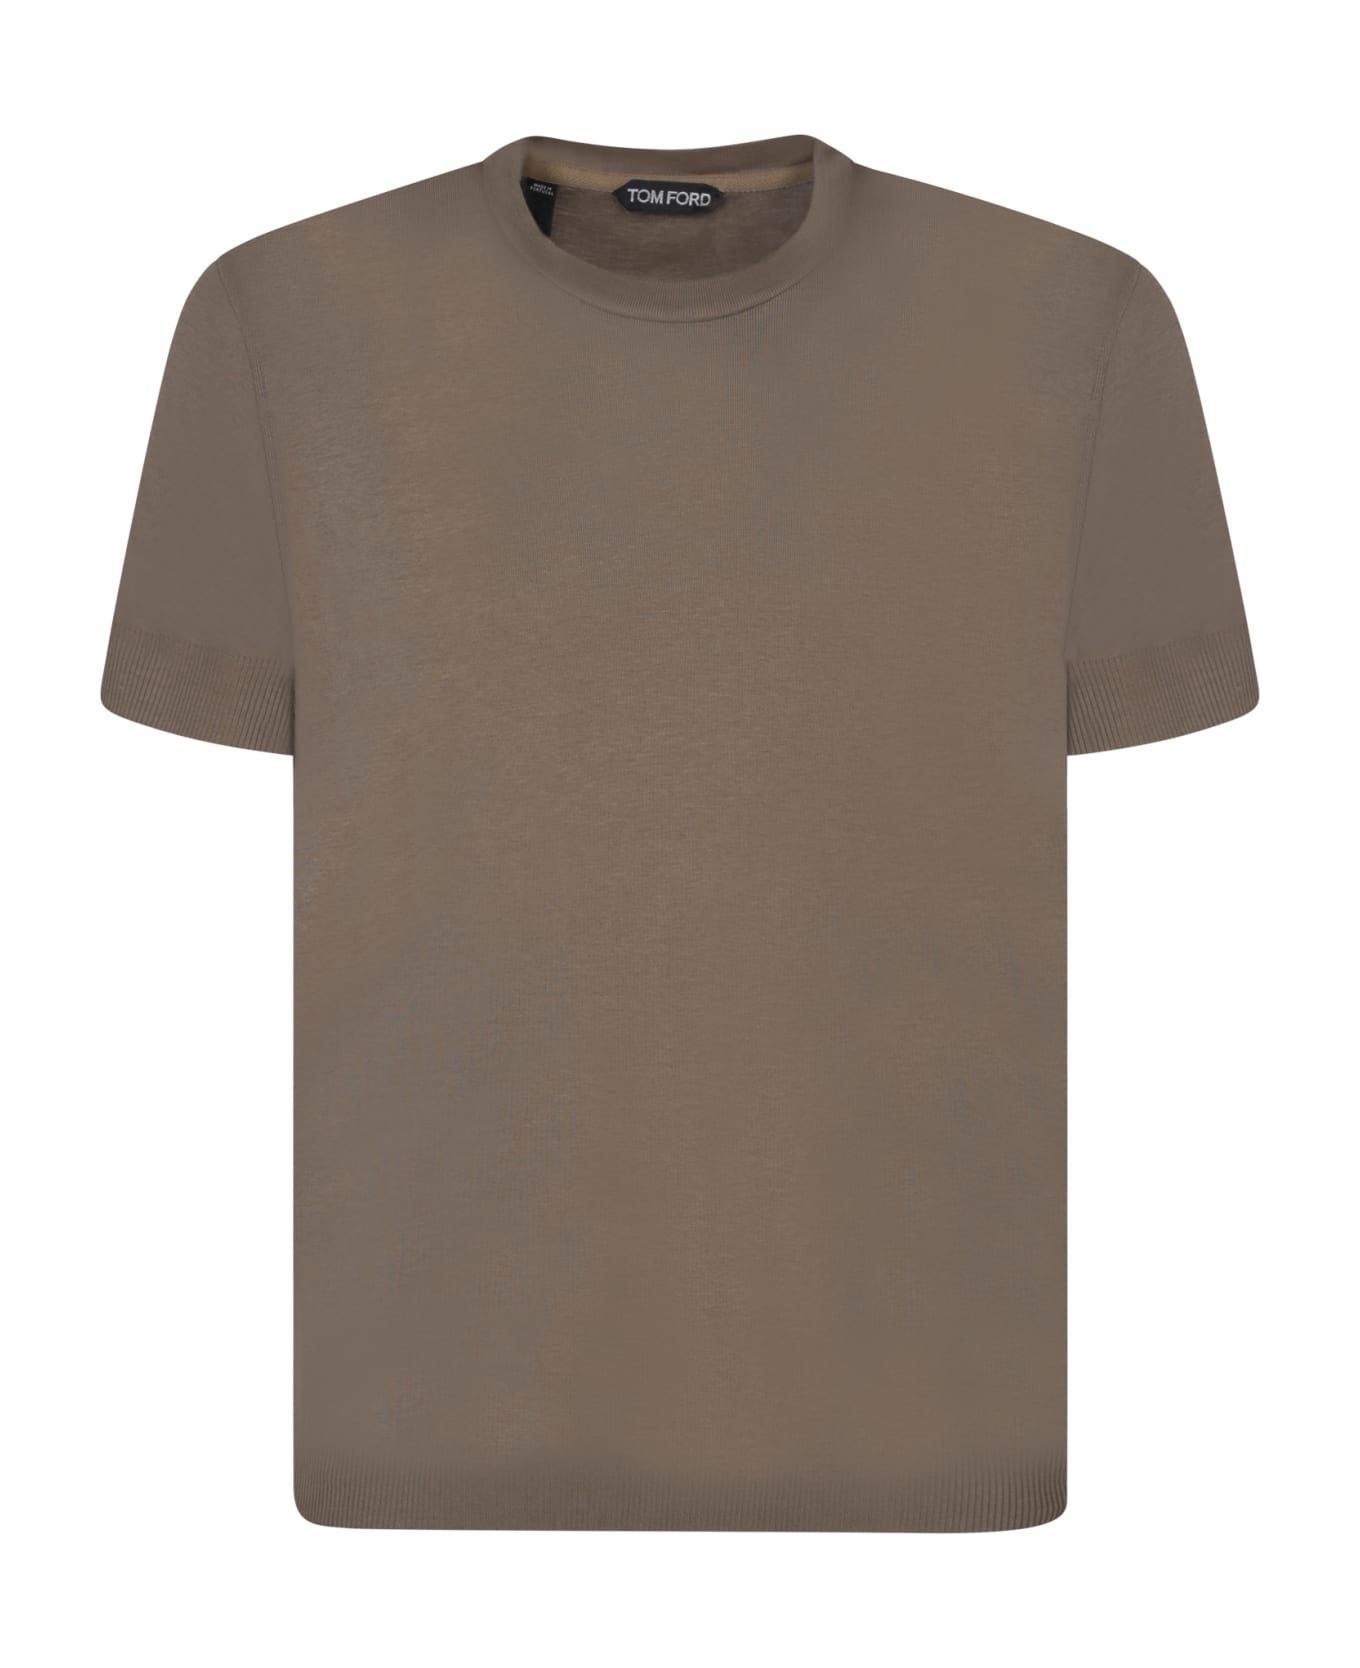 Tom Ford Ribbed Military Green T-shirt - Green